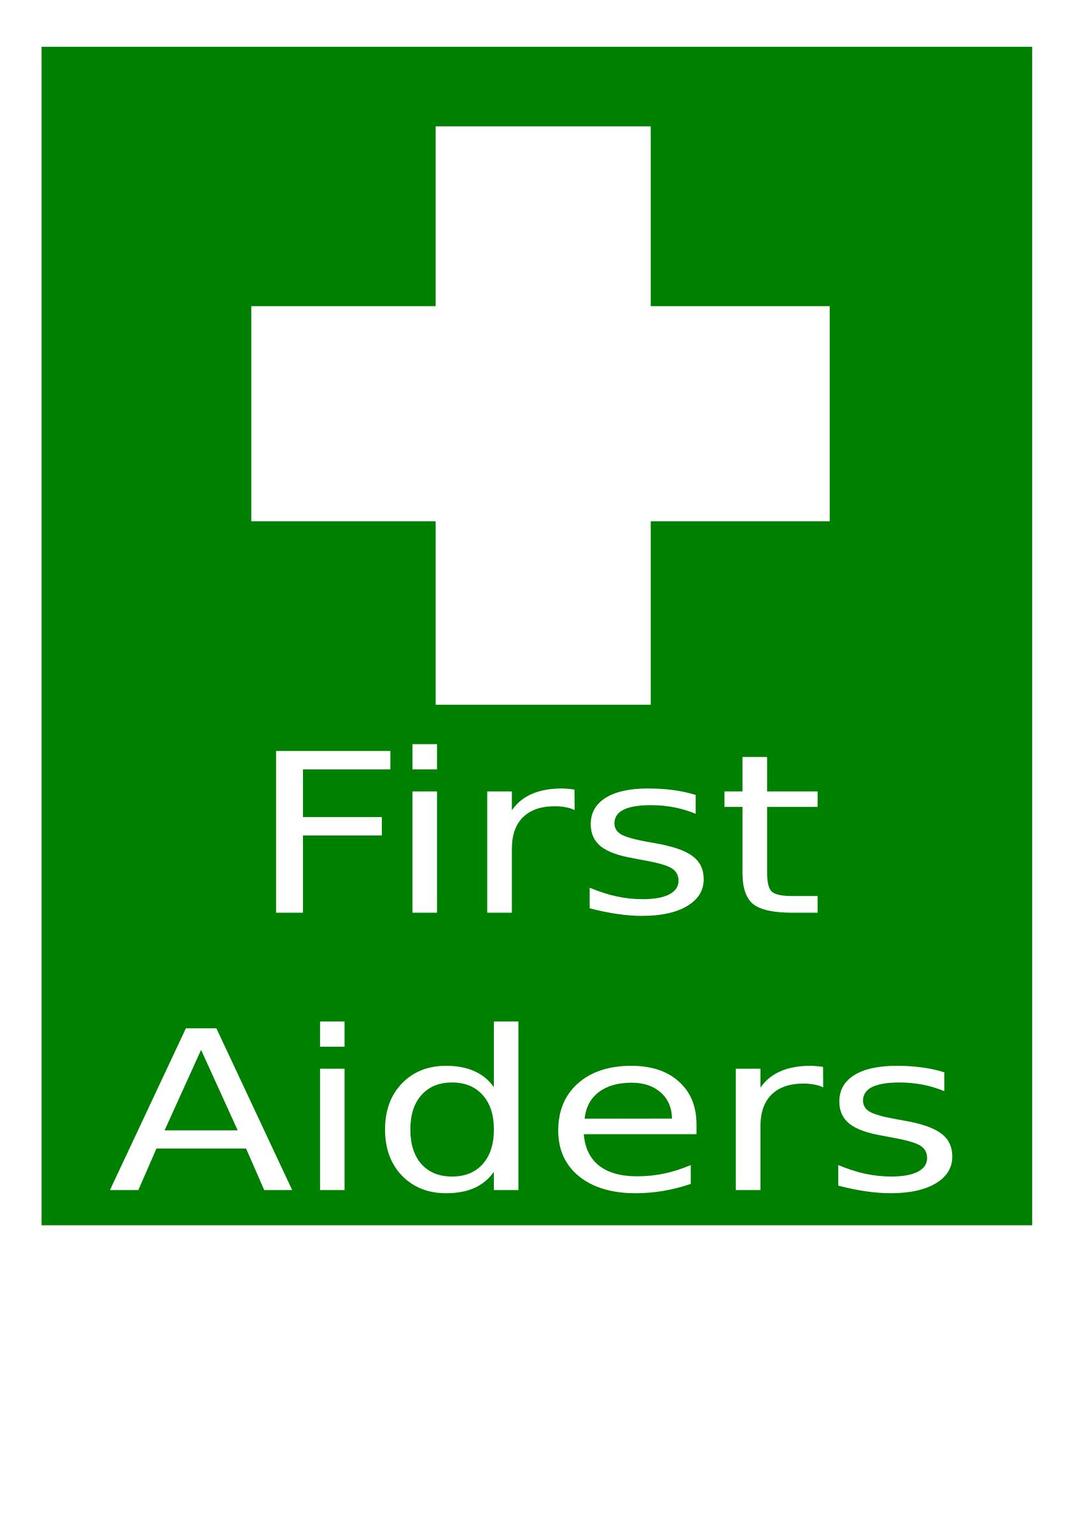 First Aiders png transparent